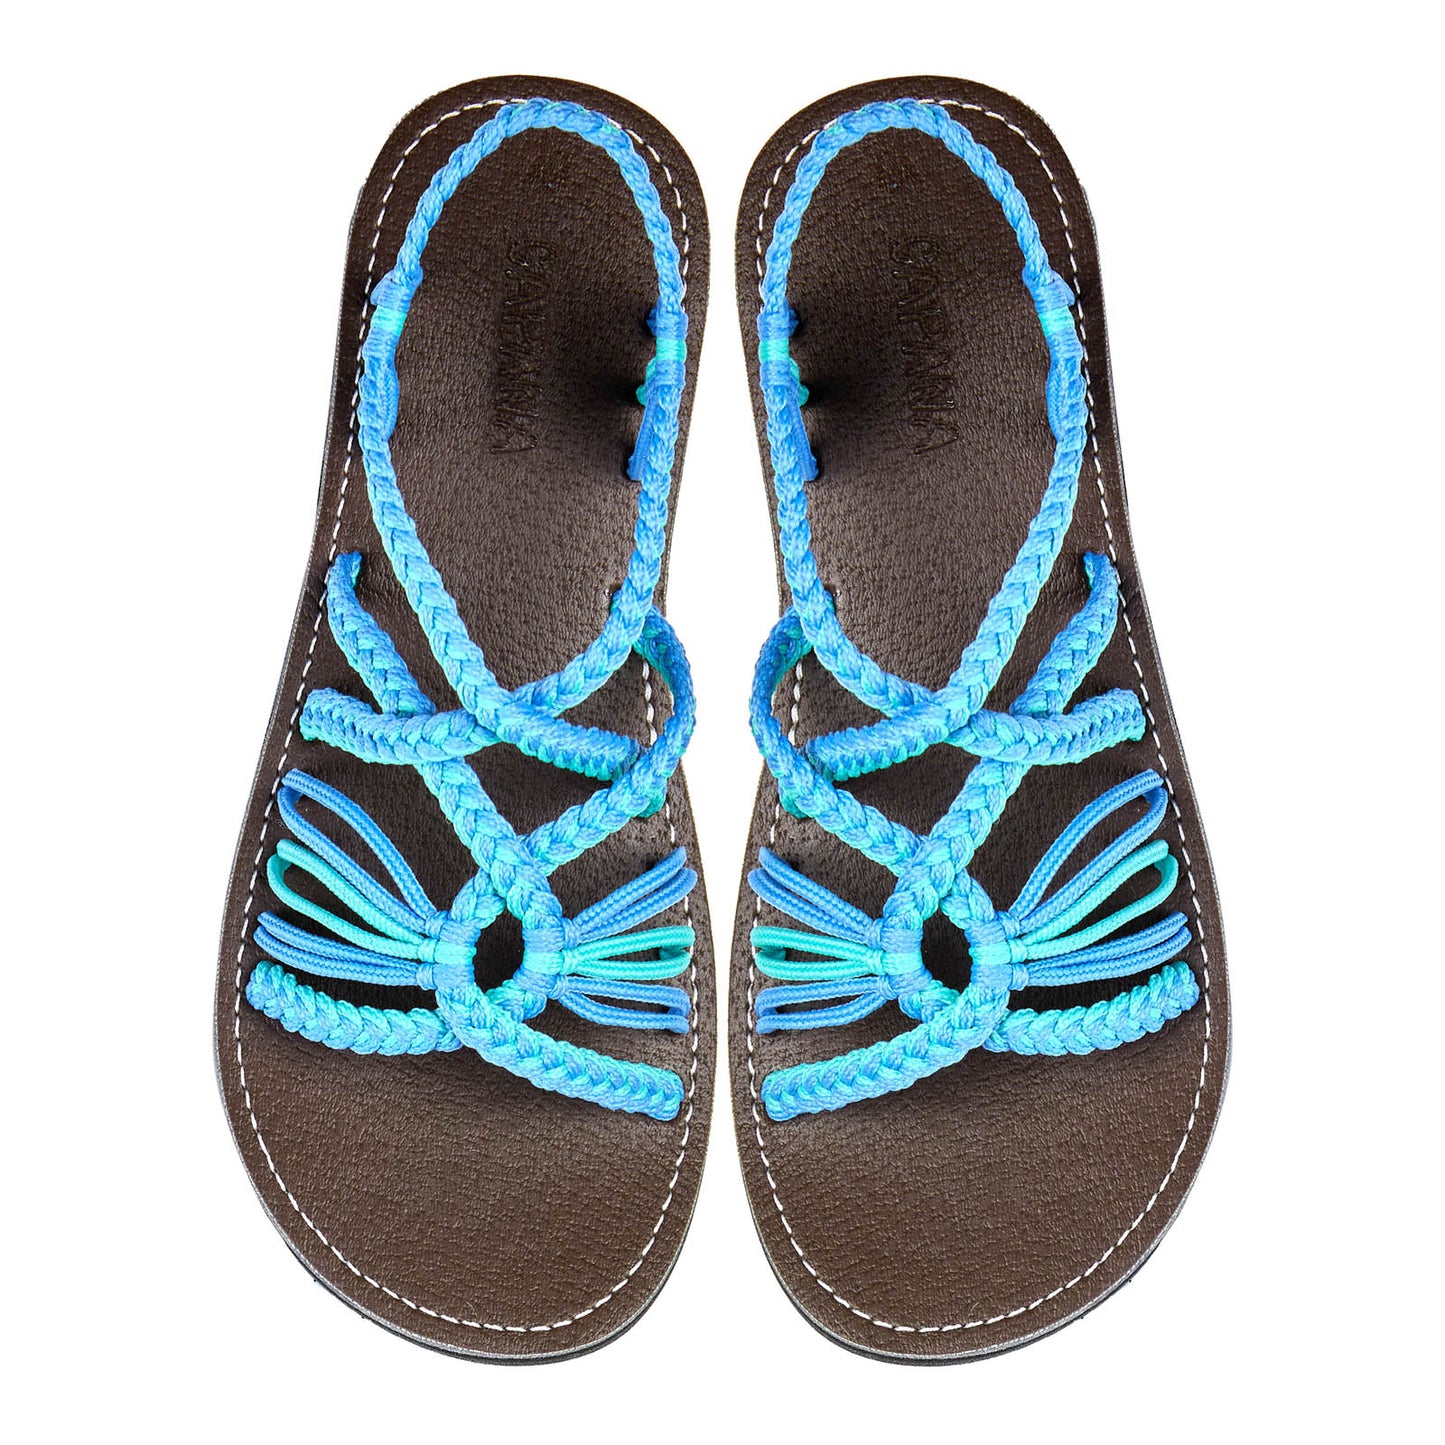 Relax Turquoise Sky Blue Rope Sandals Mint Blue Open toe wider design Flat Handmade sandals for women